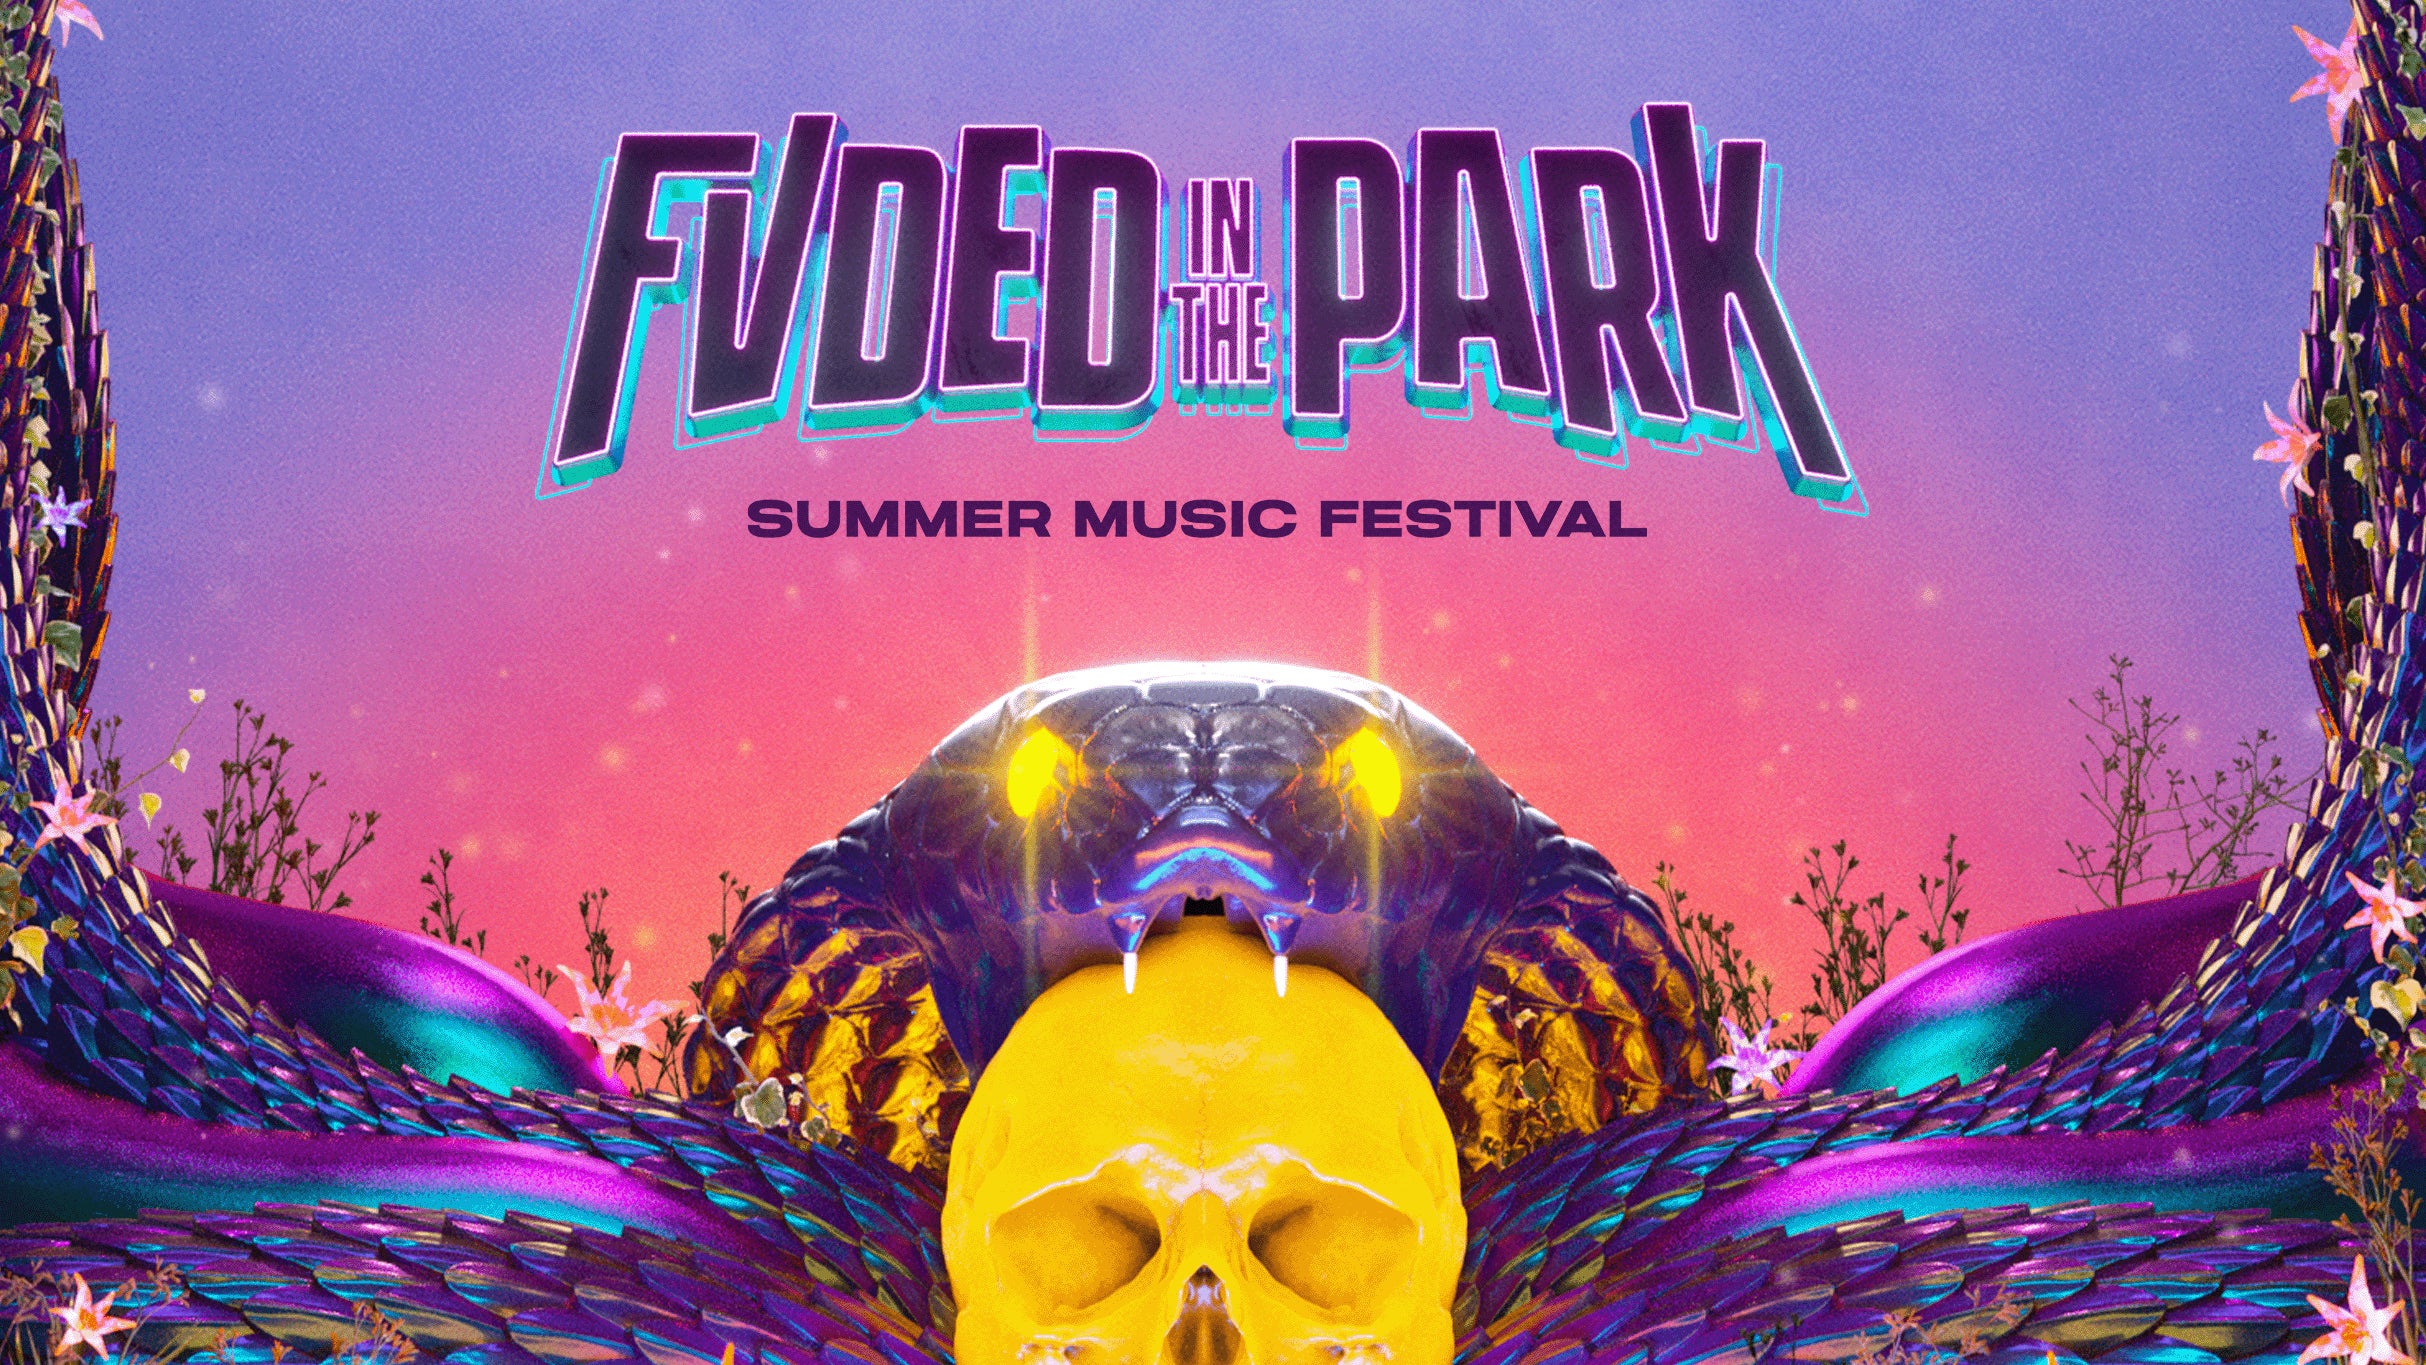 exclusive presale code for FVDED In the Park presale tickets in Surrey